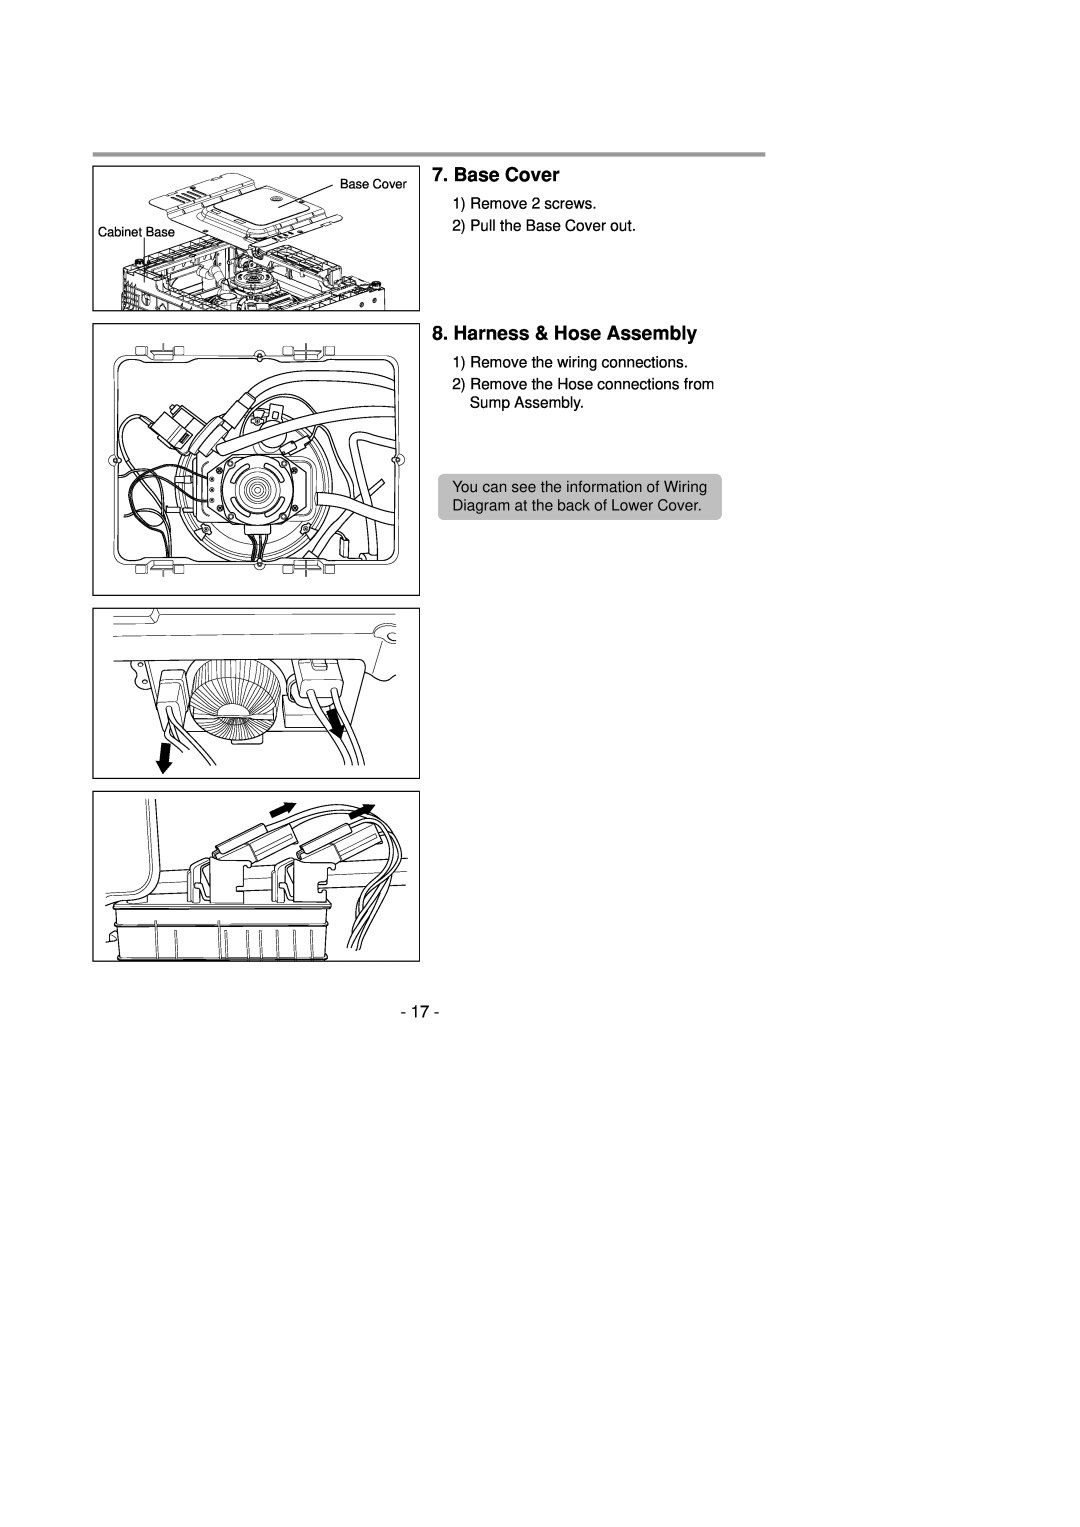 LG Electronics LDS4821(WW service manual Harness & Hose Assembly, 1Remove 2 screws 2Pull the Base Cover out 